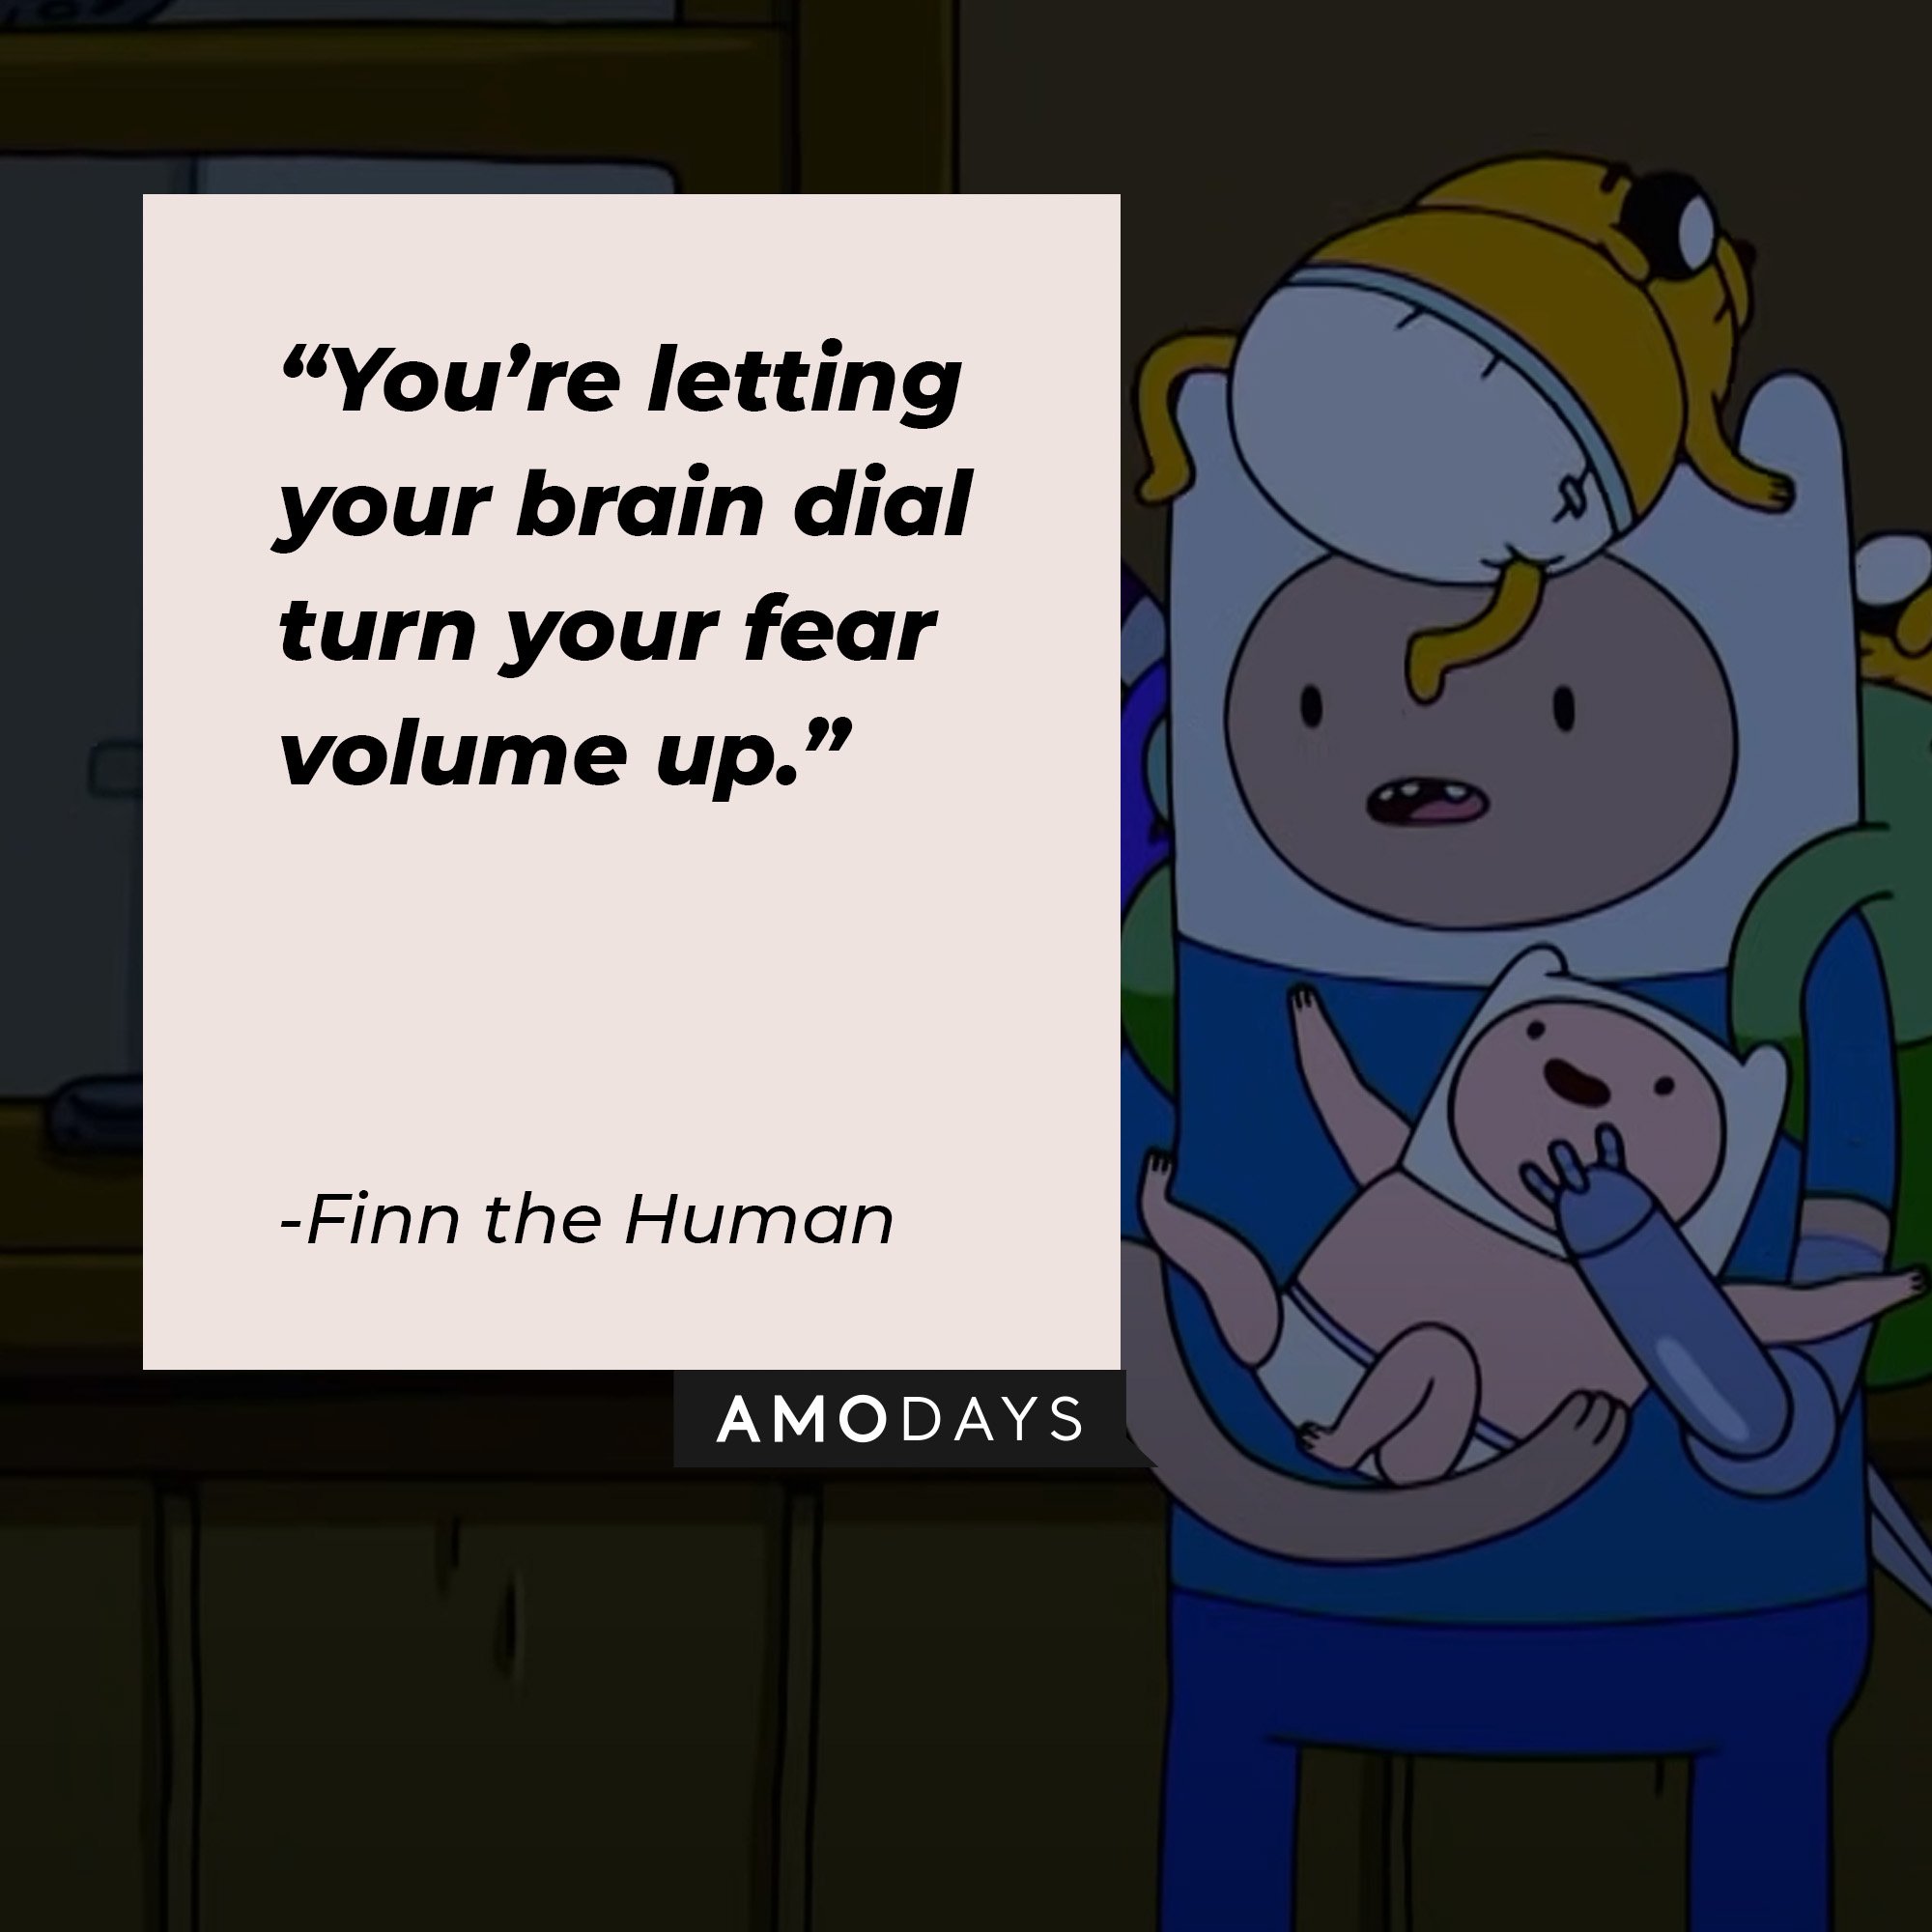 Finn the Human’s quote: “You’re letting your brain dial turn your fear volume up.”  | Image: AmoDays